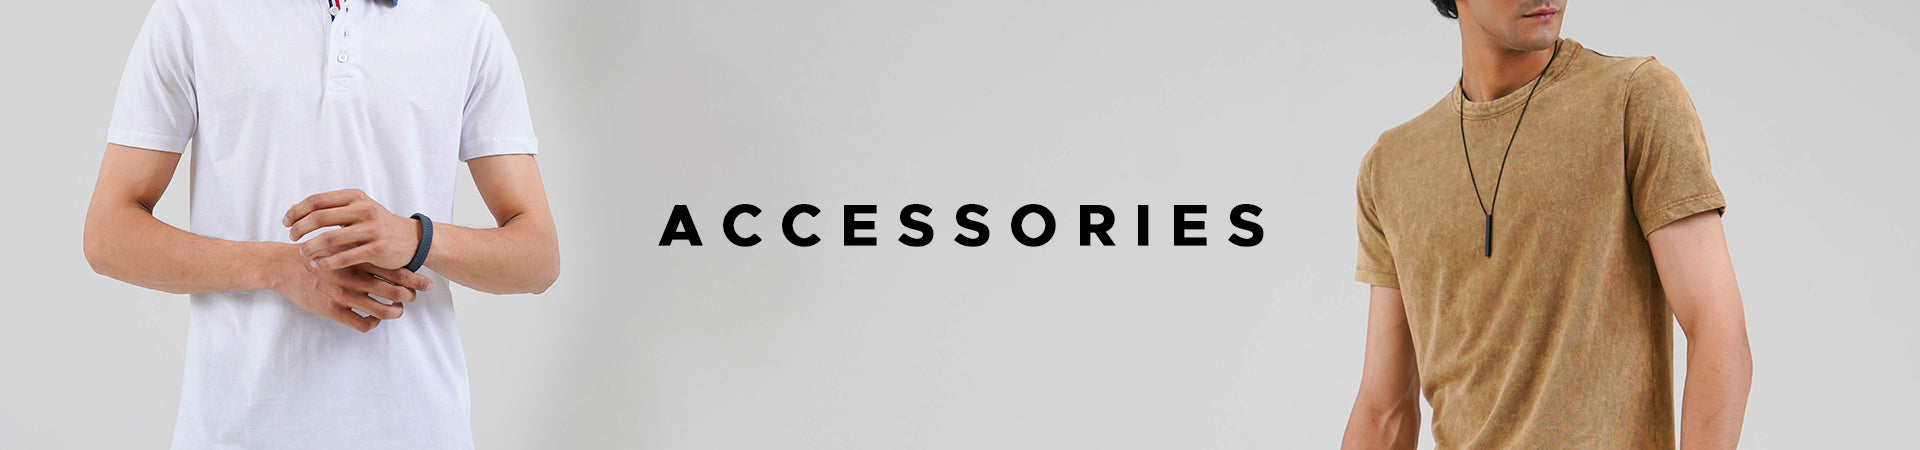 In our men’s accessories collection, you’ll find belts, comfy boxers, essential vests and socks.